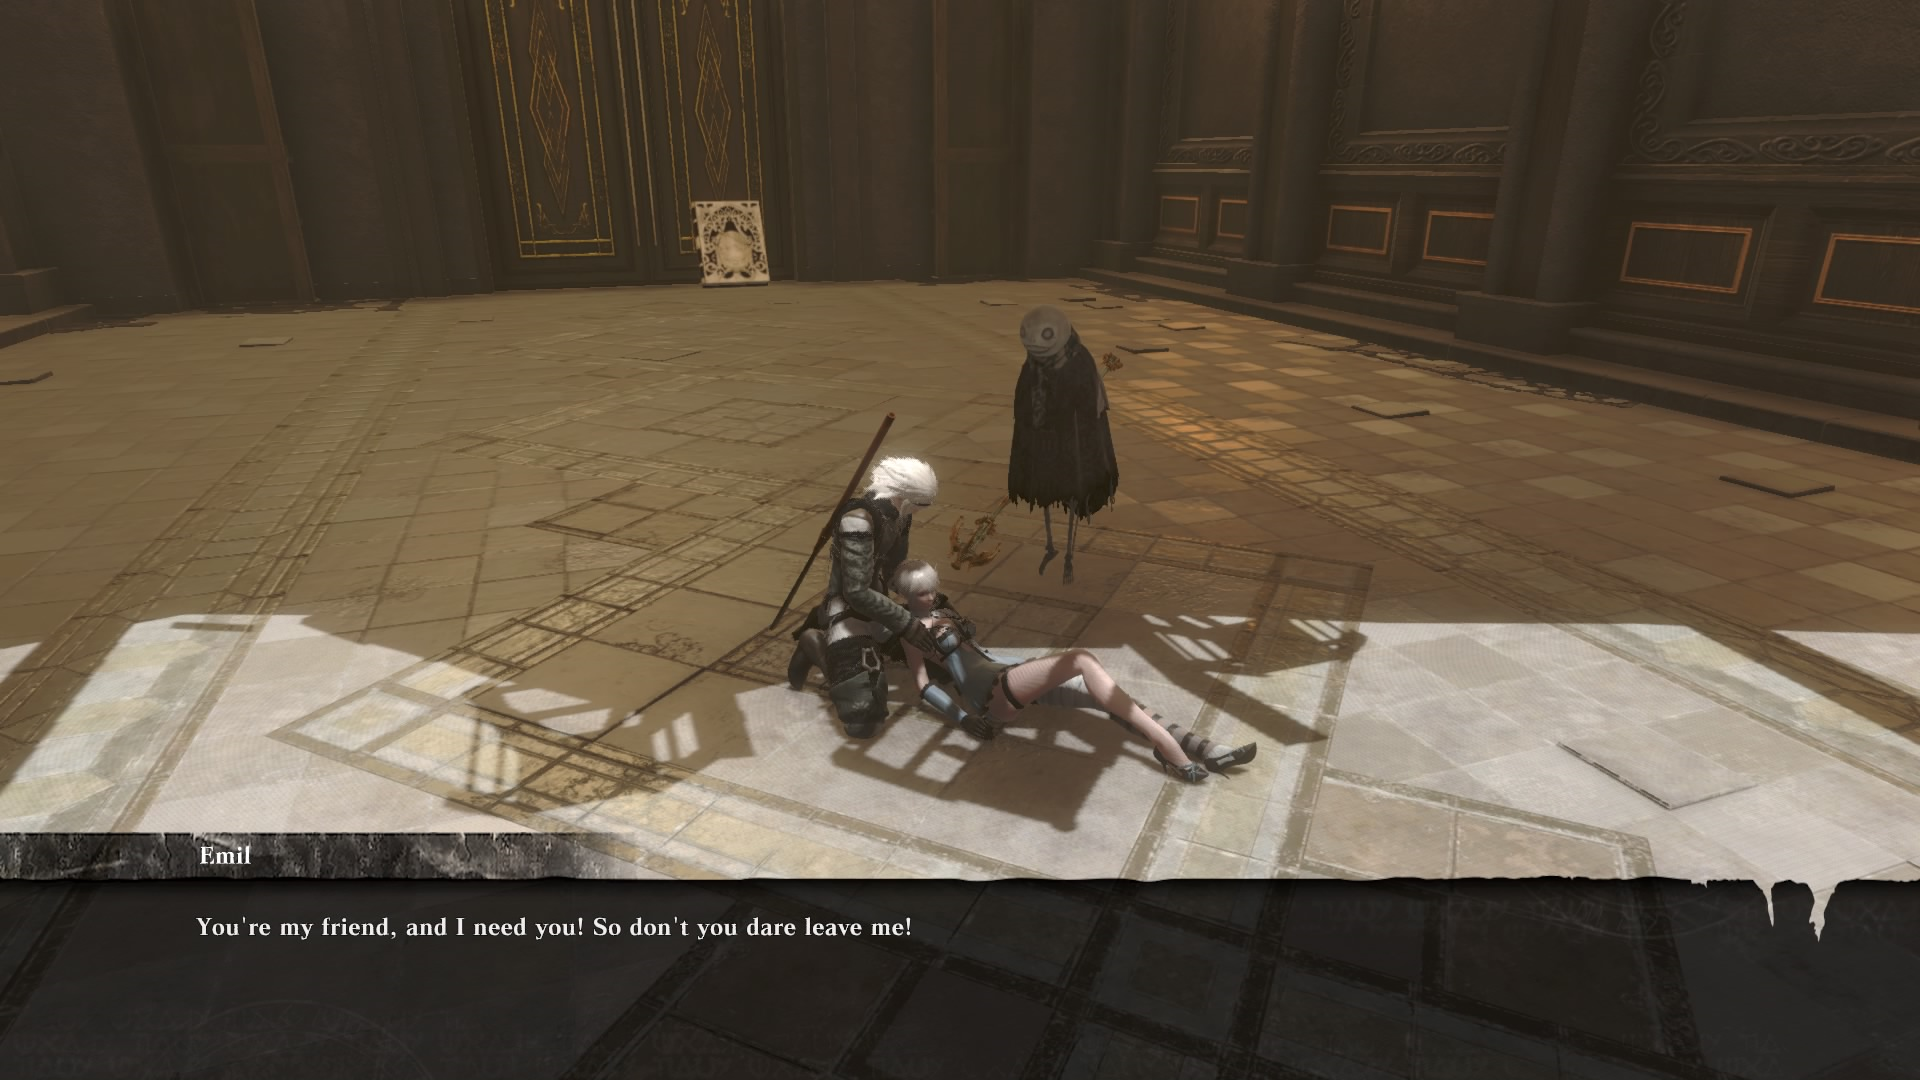 Nier and Emil standing over Kaine's body. Emil is saying "You're my friend and I need you. So don't you dare leave me!"